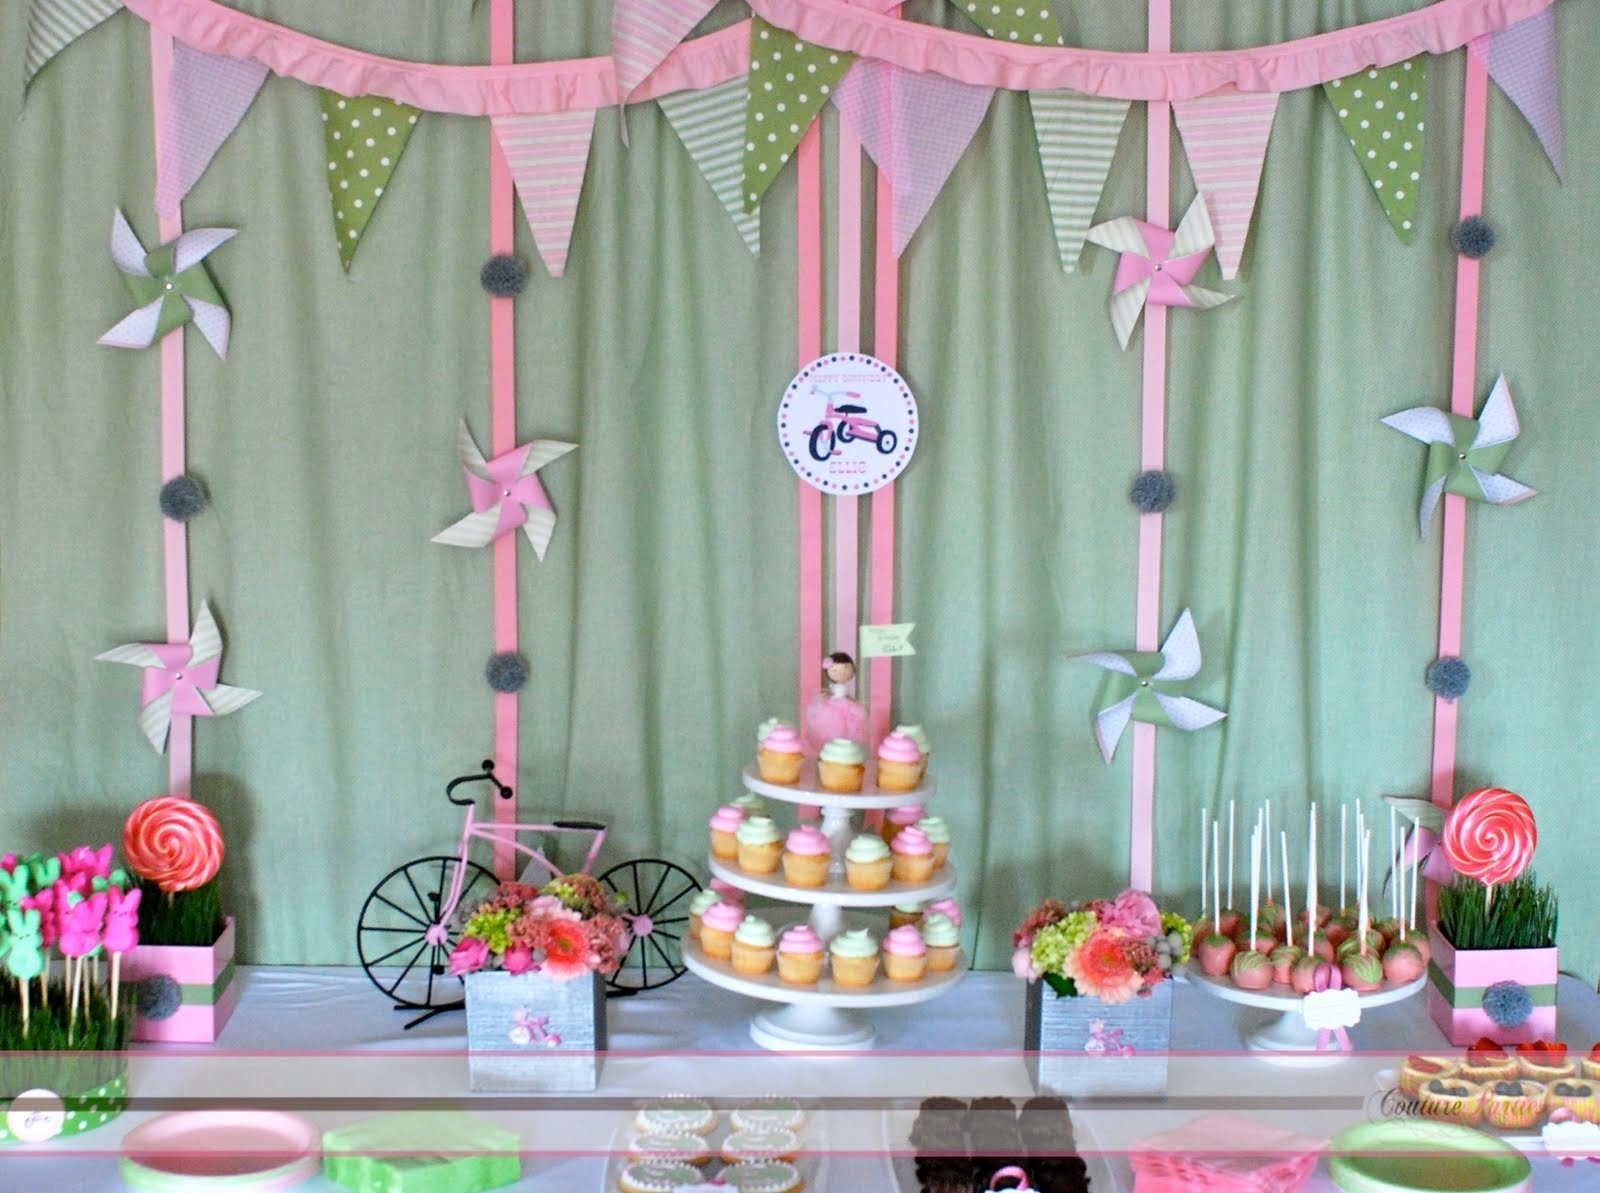 10 Trendy Ideas For Girls Birthday Parties 50 birthday party themes for girls i heart nap time 56 2022